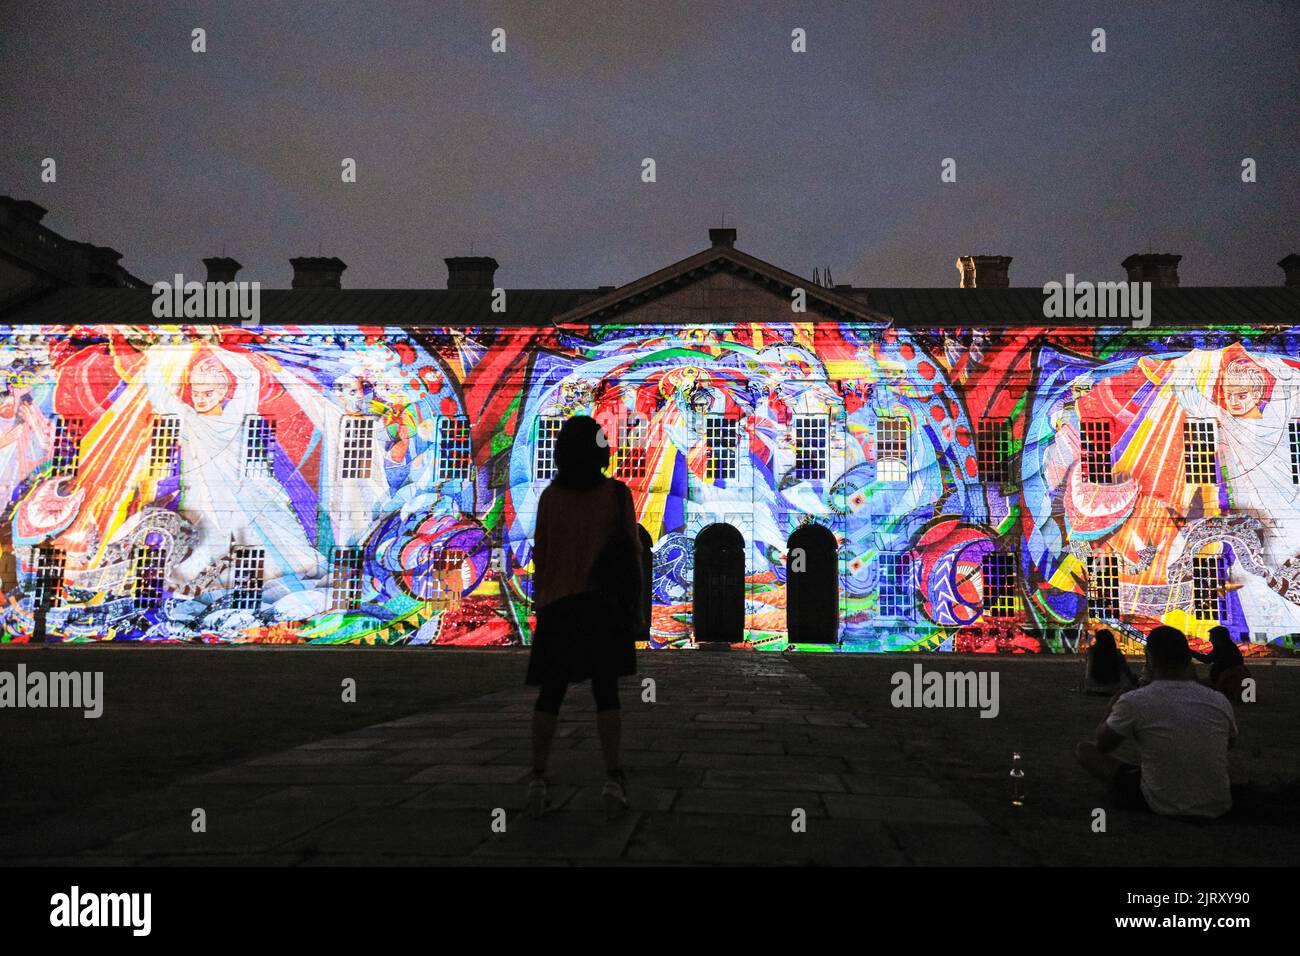 London, UK. 26th Aug, 2022. Light projections in Discover Ukraine: Bits Destroyed bring to life traditional Ukrainian mosaics on the walls of the Old Royal Naval College, as part of Greenwich and Docklands International Festival. Ukraine's rich cultural heritage is under devastating attack. In response, Kyiv-based photographer Yevgen Nikiforov and the Ukrainian creative team of ROCK ‘N' LIGHT STUDIO and PTAKH JUNG have designed this dazzling digital artwork. The projections run until 29th August. Credit: Imageplotter/Alamy Live News Stock Photo